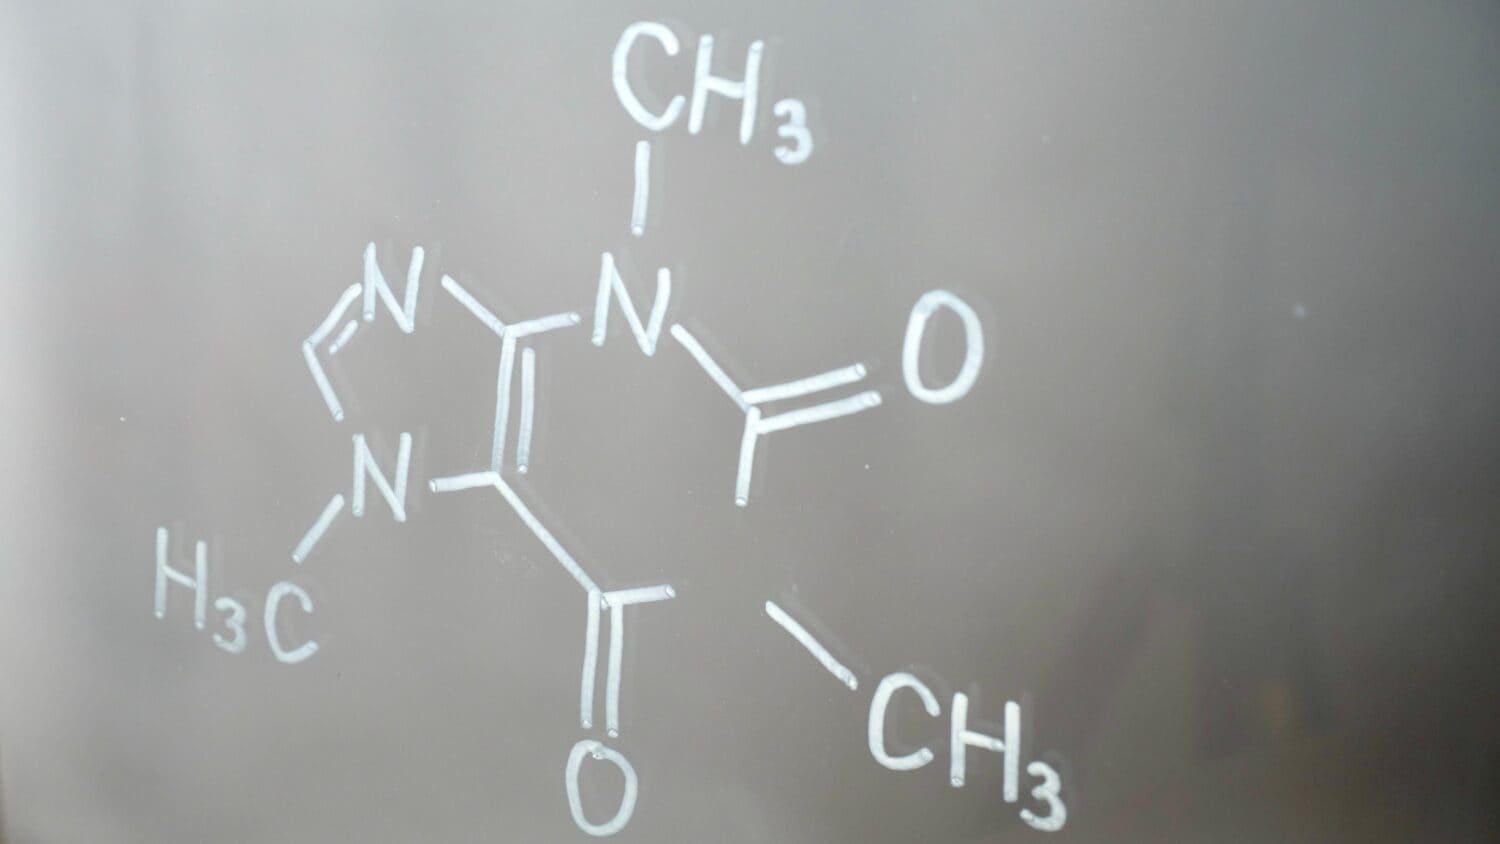 Chemical structure, formula of caffeine on glass in the lab close-up. Showing functional amine and amide groups.